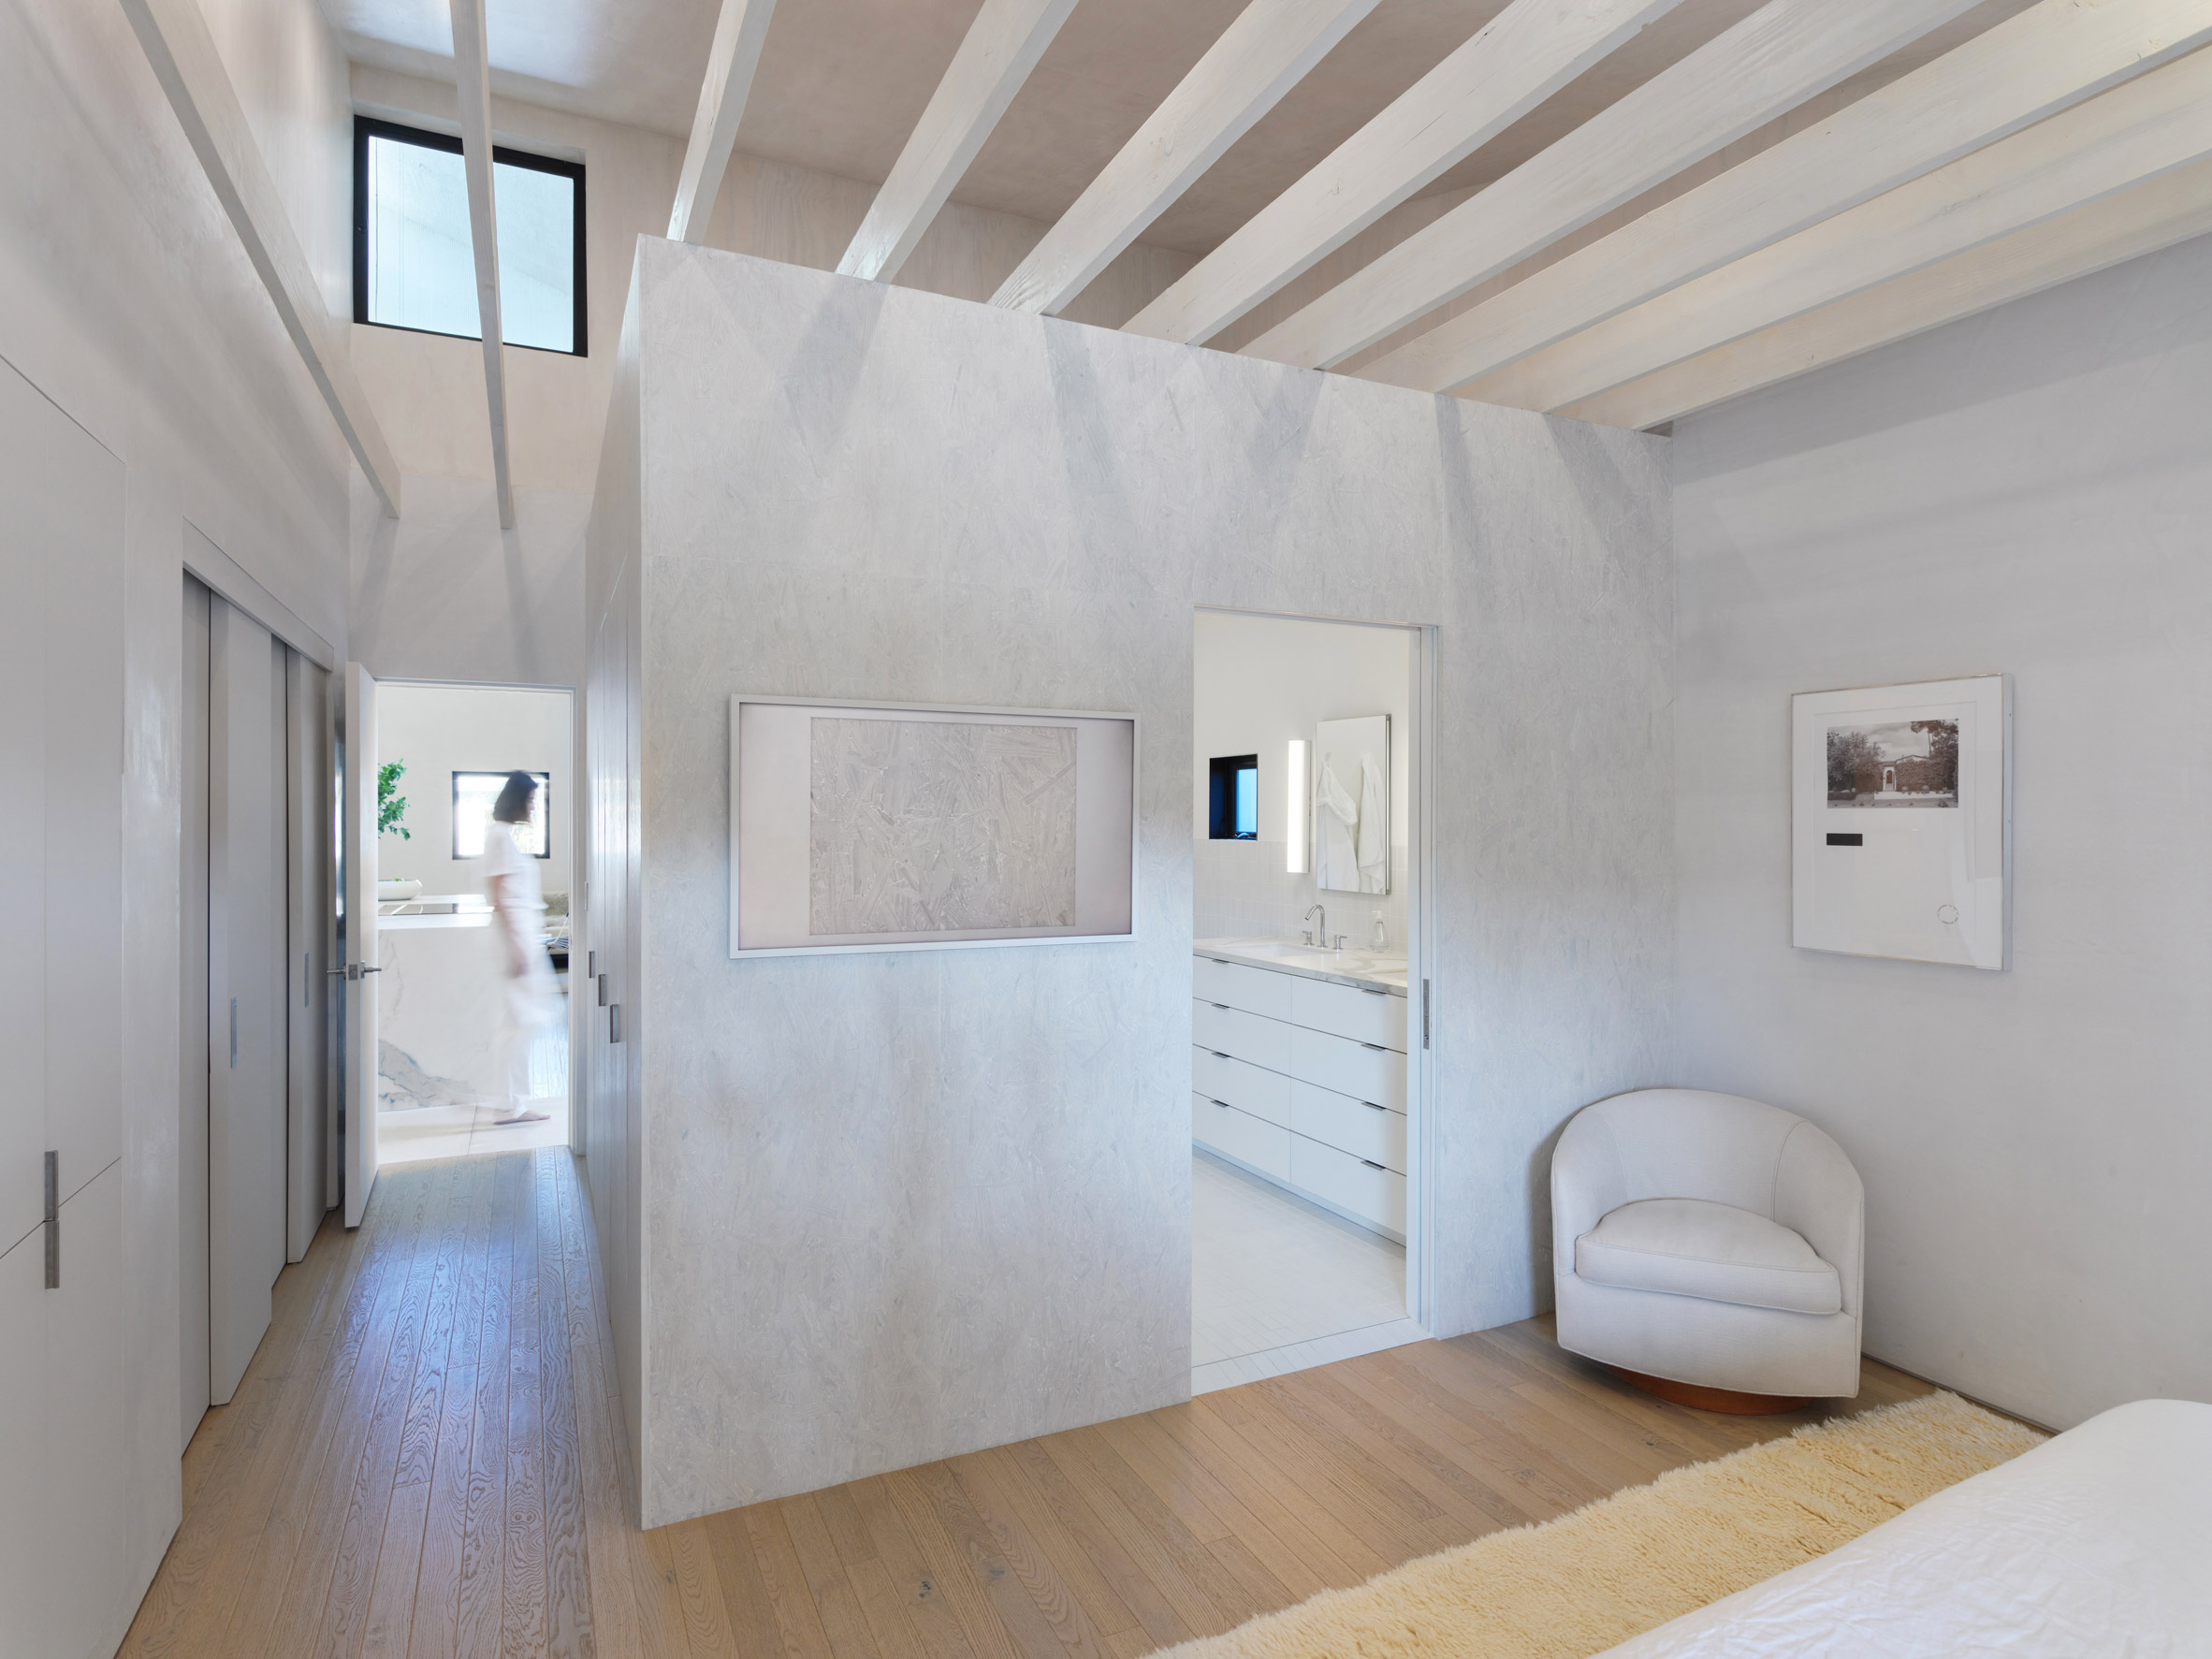 White bedroom with wooden floors and white partition walls concealing a bathroom